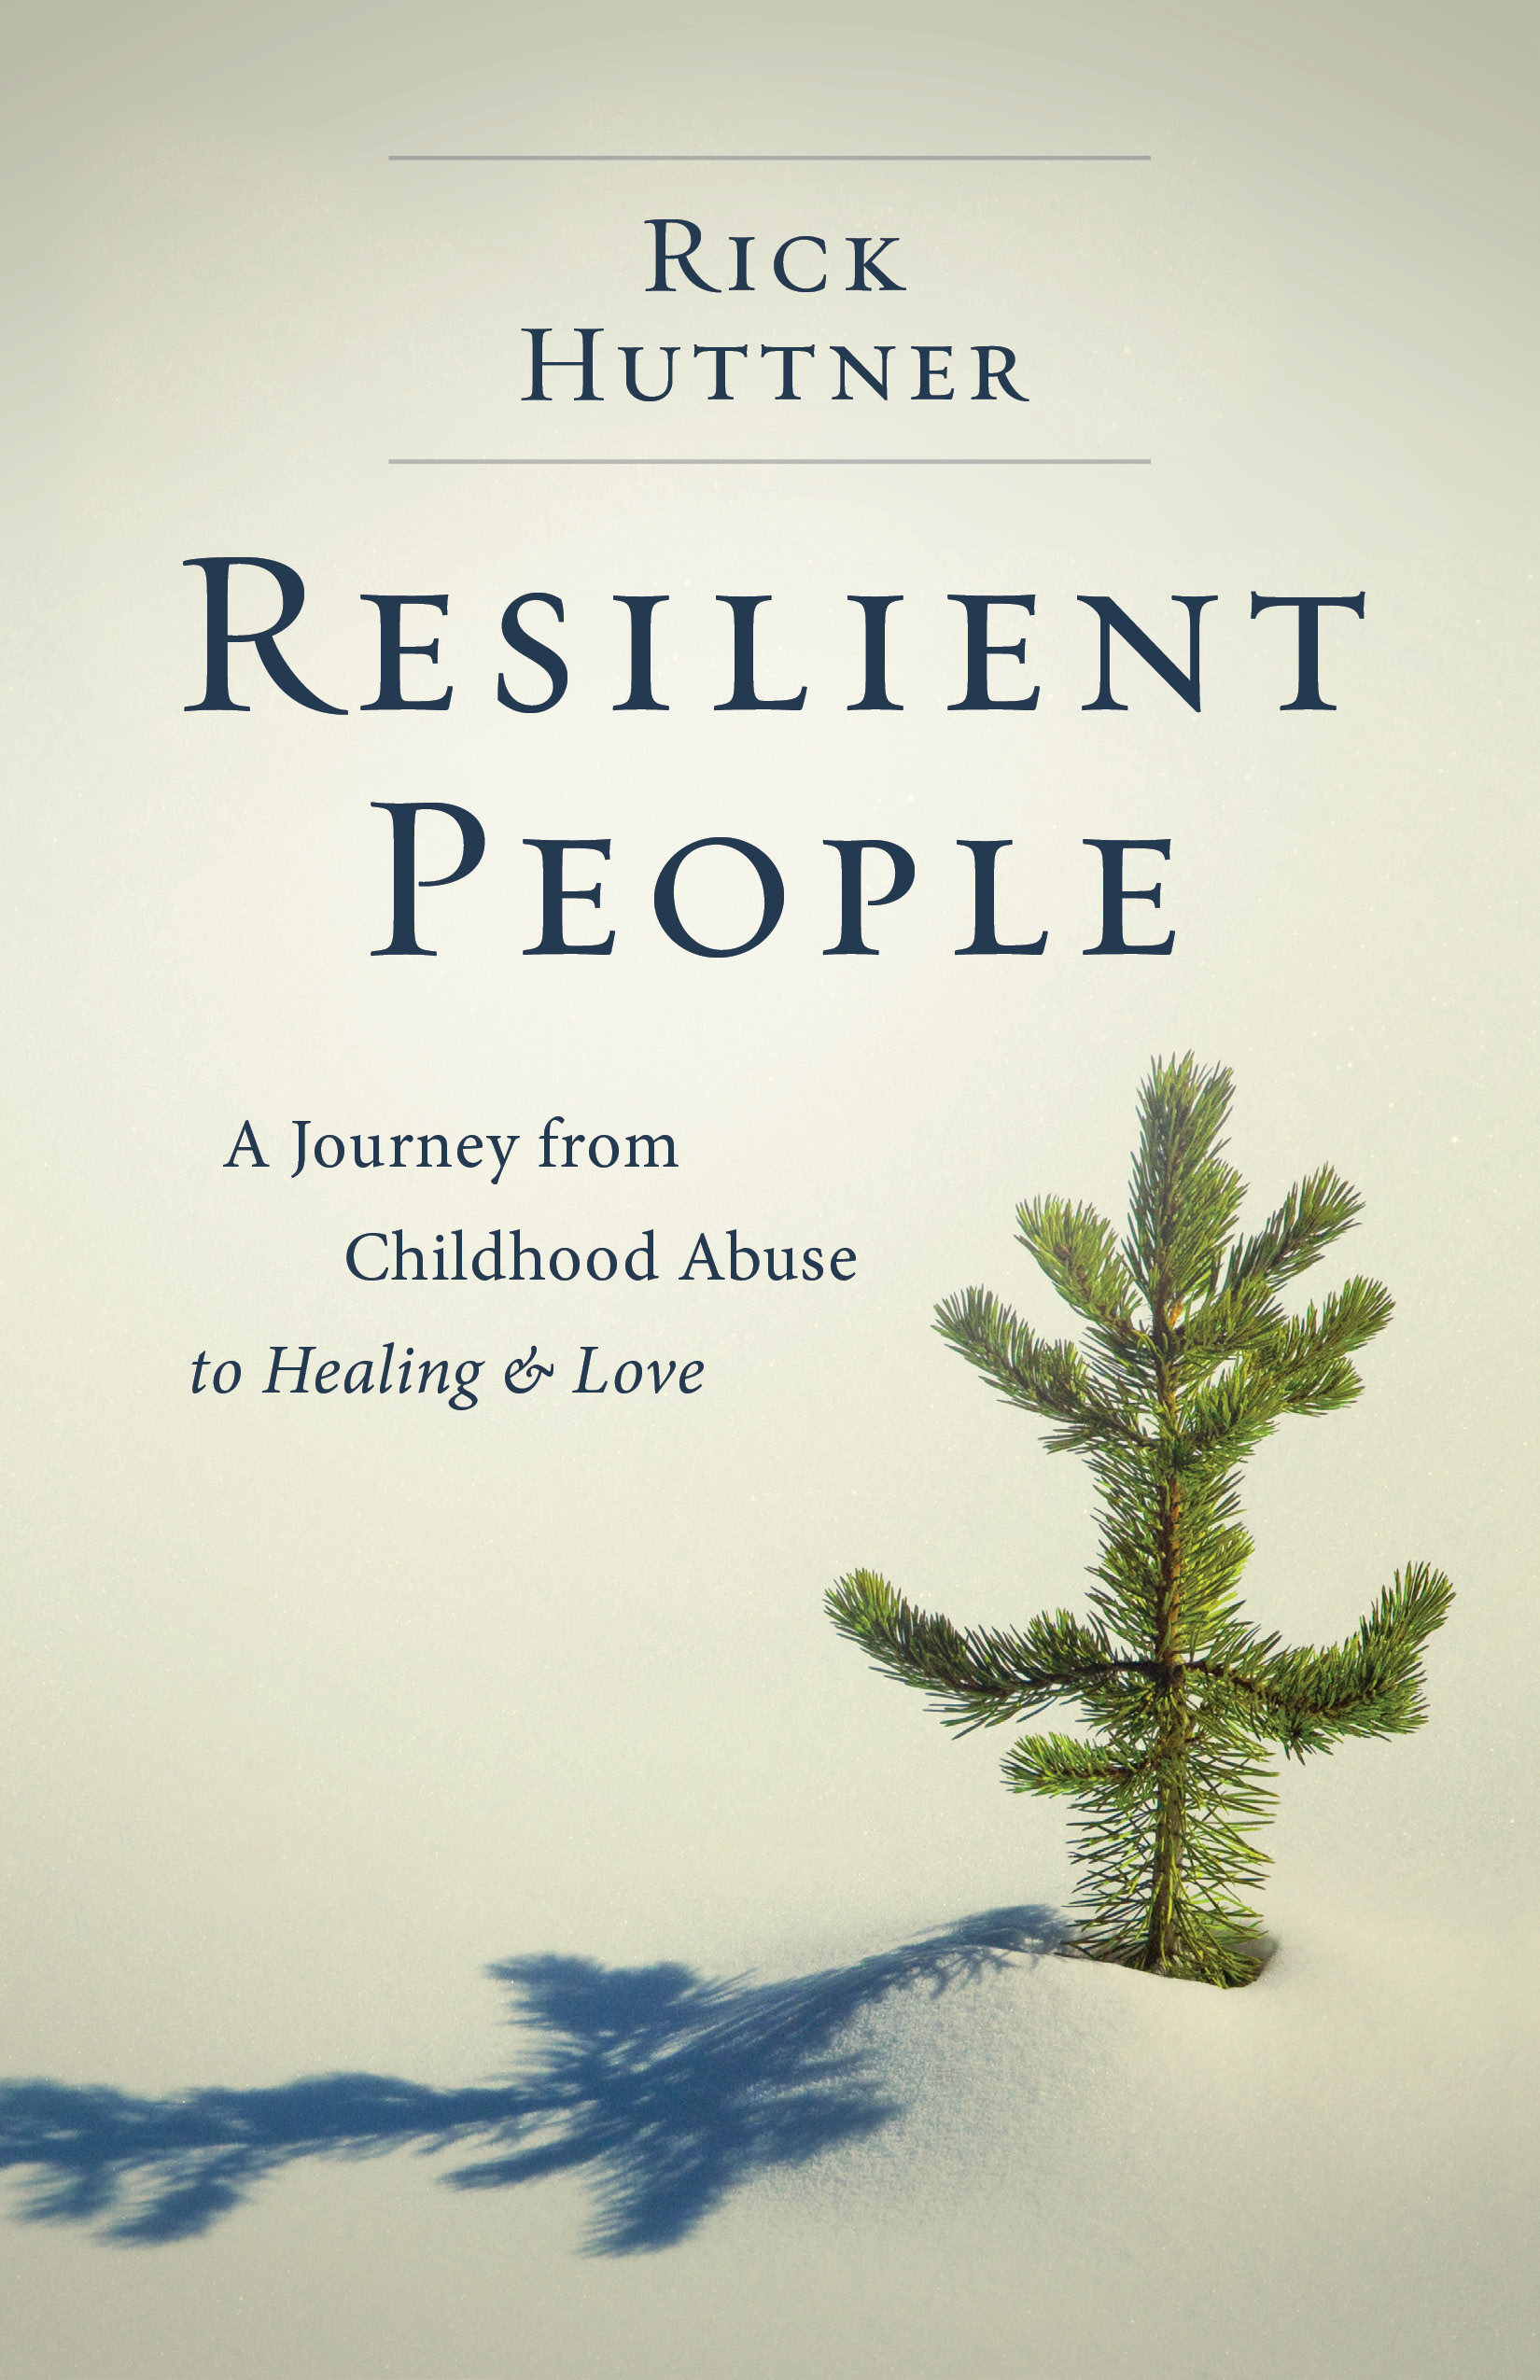 Resilient People